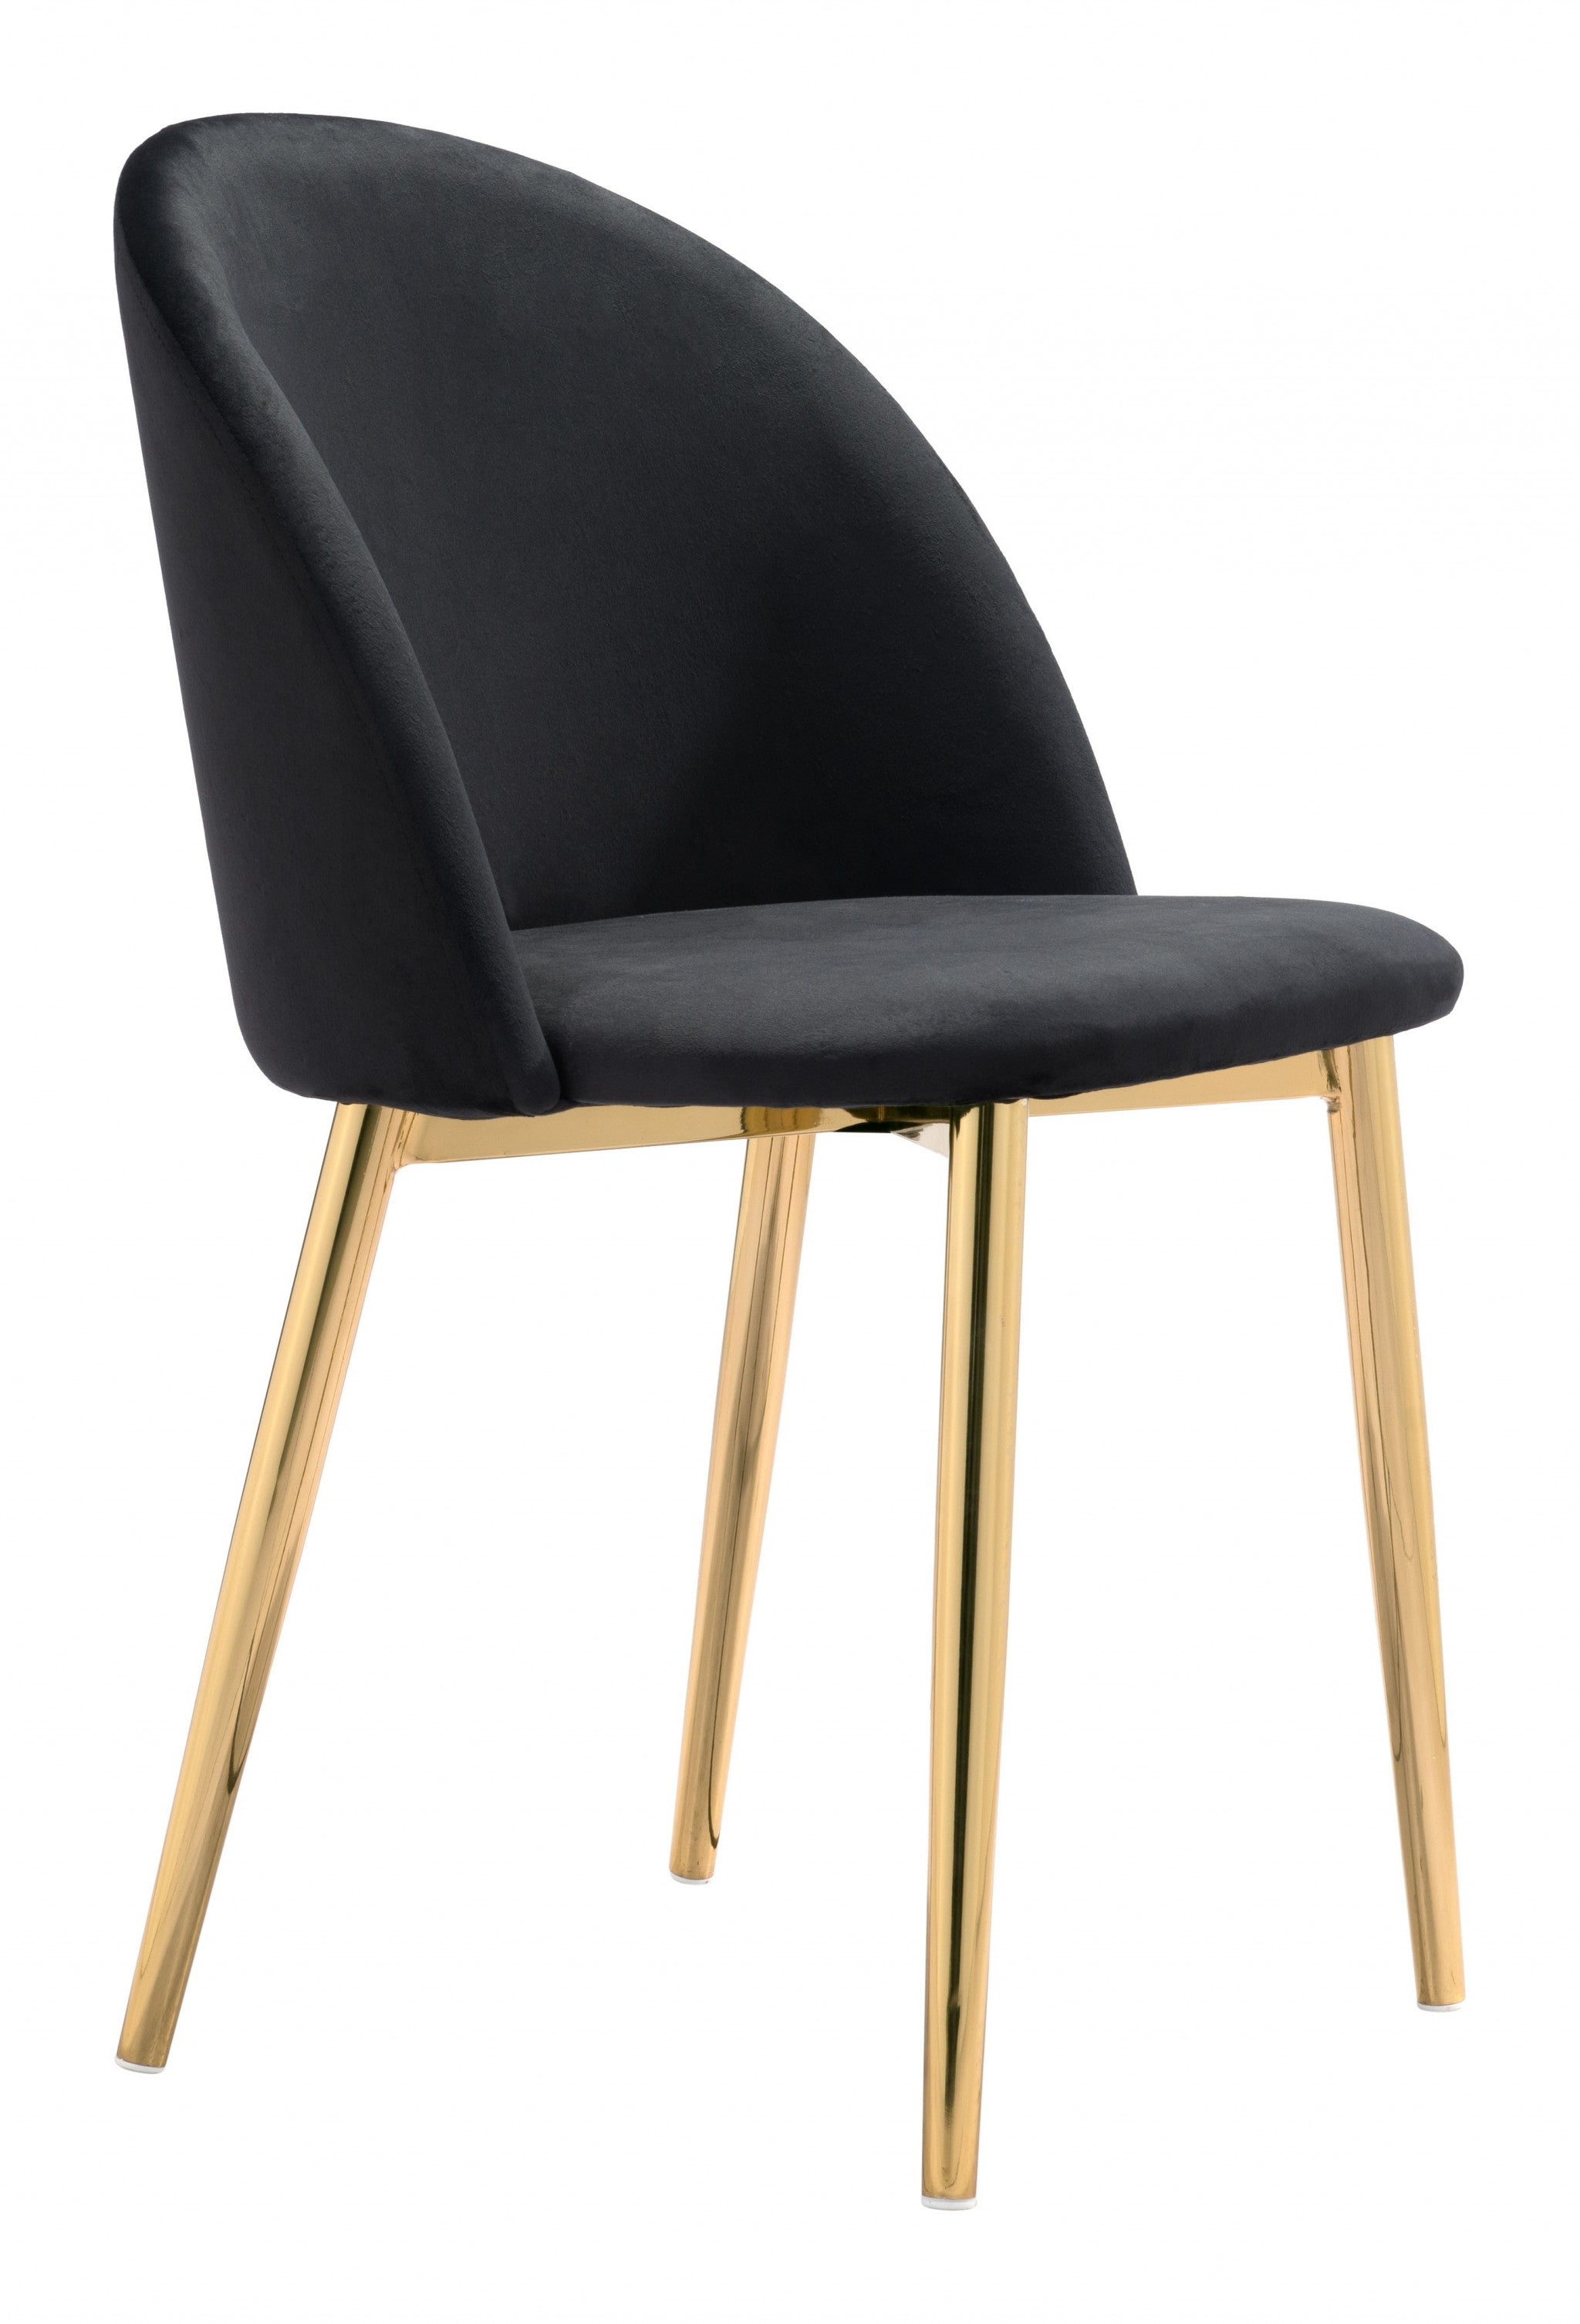 Set of Two Black And Gold Upholstered Polyester Dining Side chairs